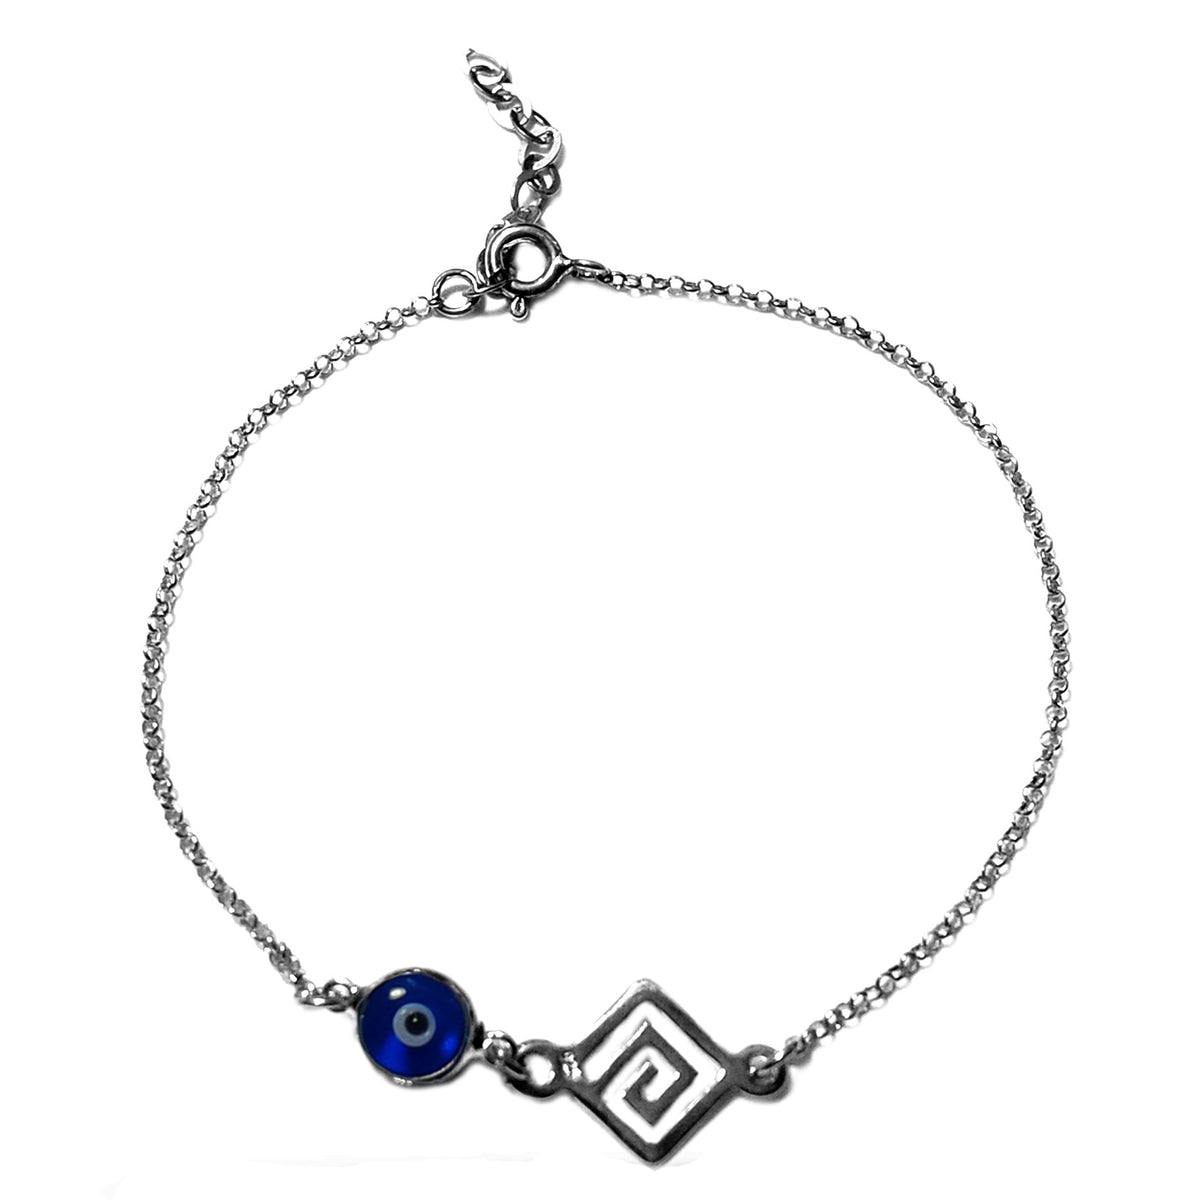 Maiandros Theme Double Sided Evil Eye Adjustable Necklace In Sterling Silver, 17" to 18" fine designer jewelry for men and women